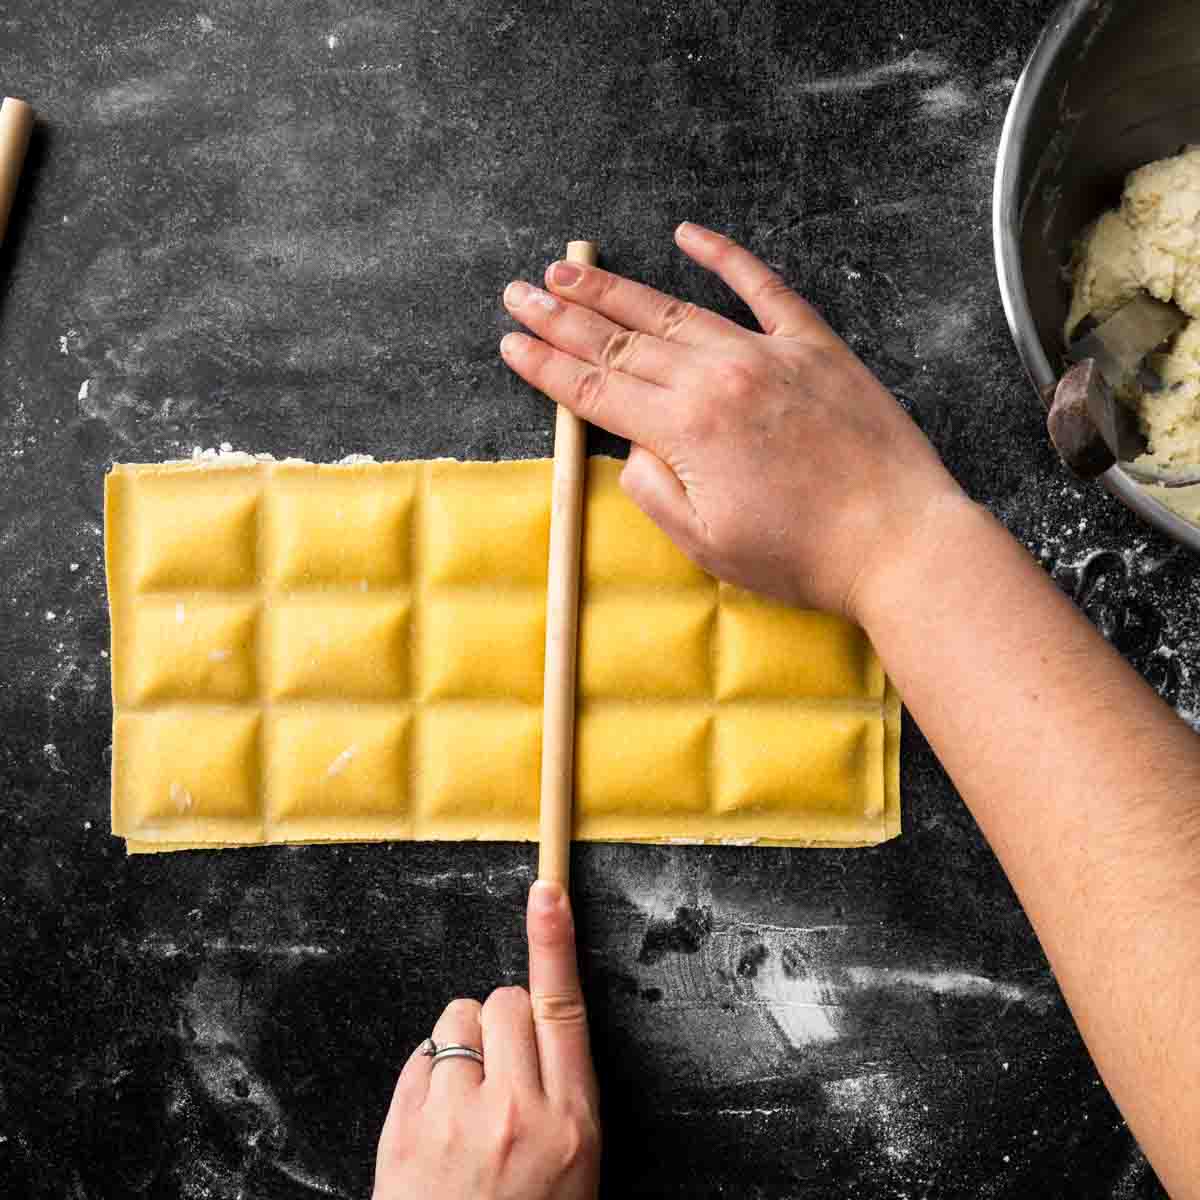 Firmly pressing a dowel into the ravioli to create an even shape and seal.